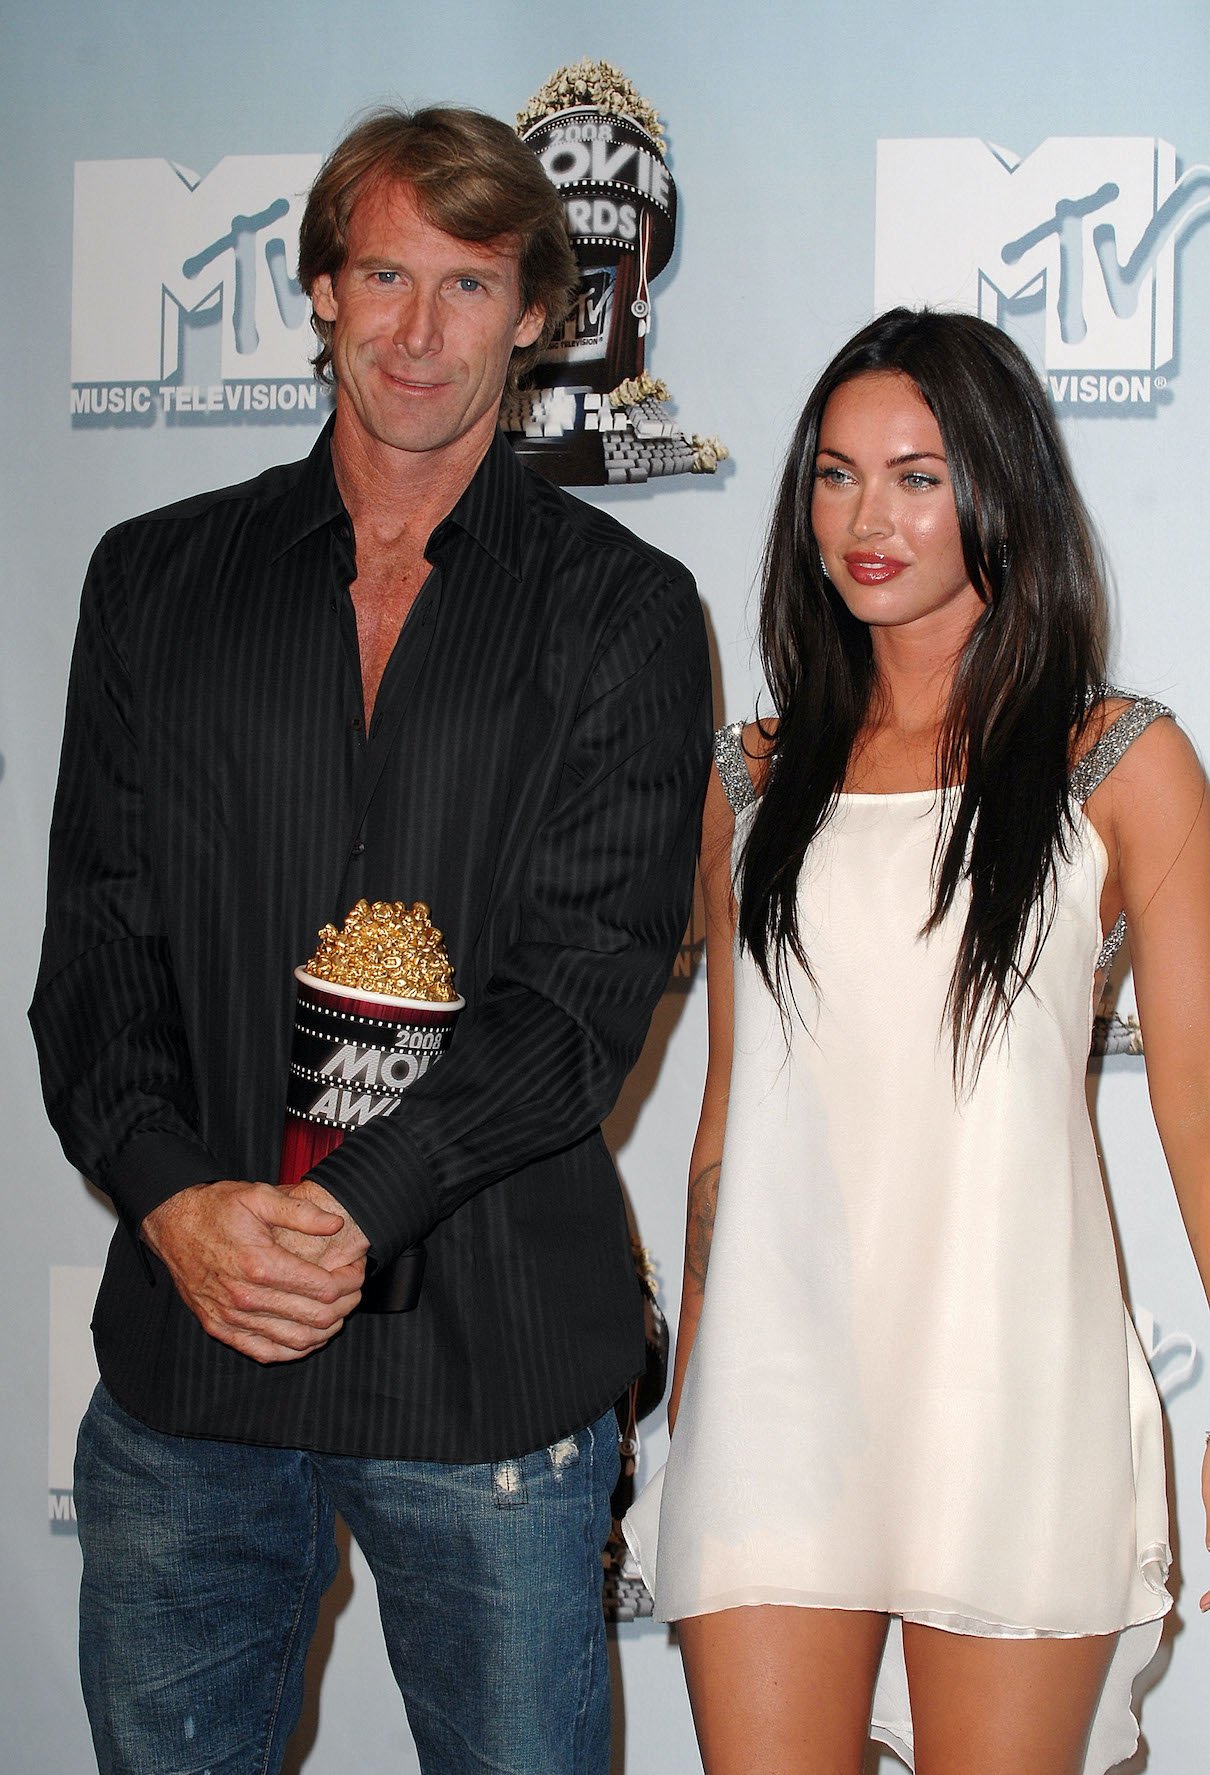 Michael Bay and actress Megan Fox in the press room at the 2008 MTV Movie Awards on June 1, 2008